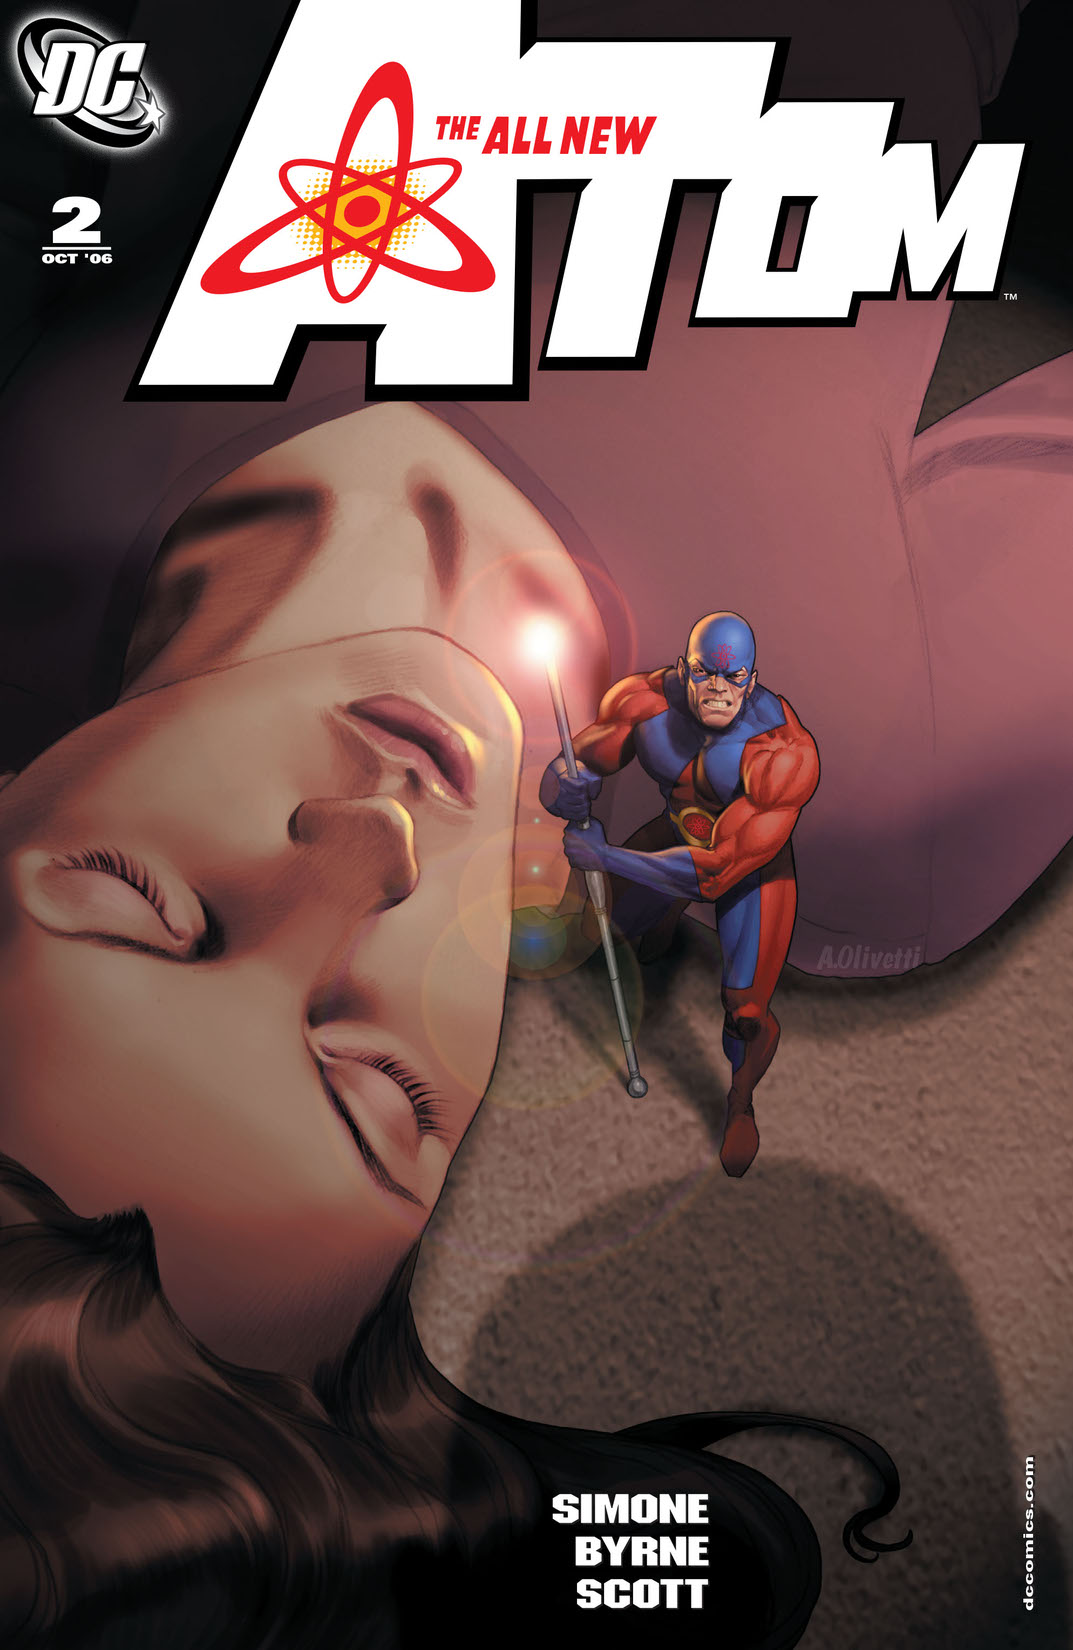 The All New Atom #2 preview images